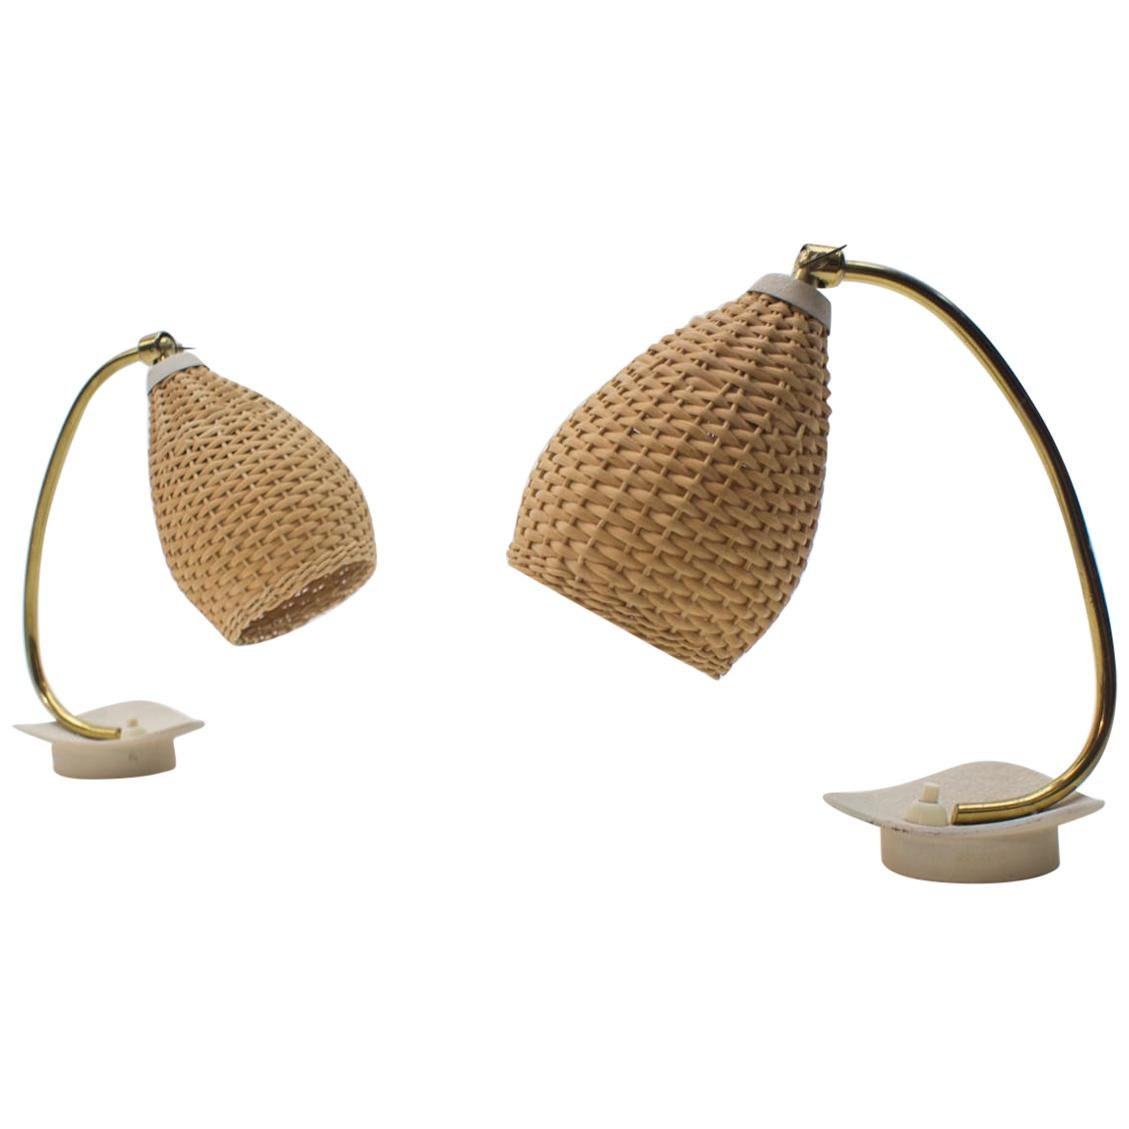 Pair of Lovely Brass and Wicker Table Lamps from the 1950s, Austria